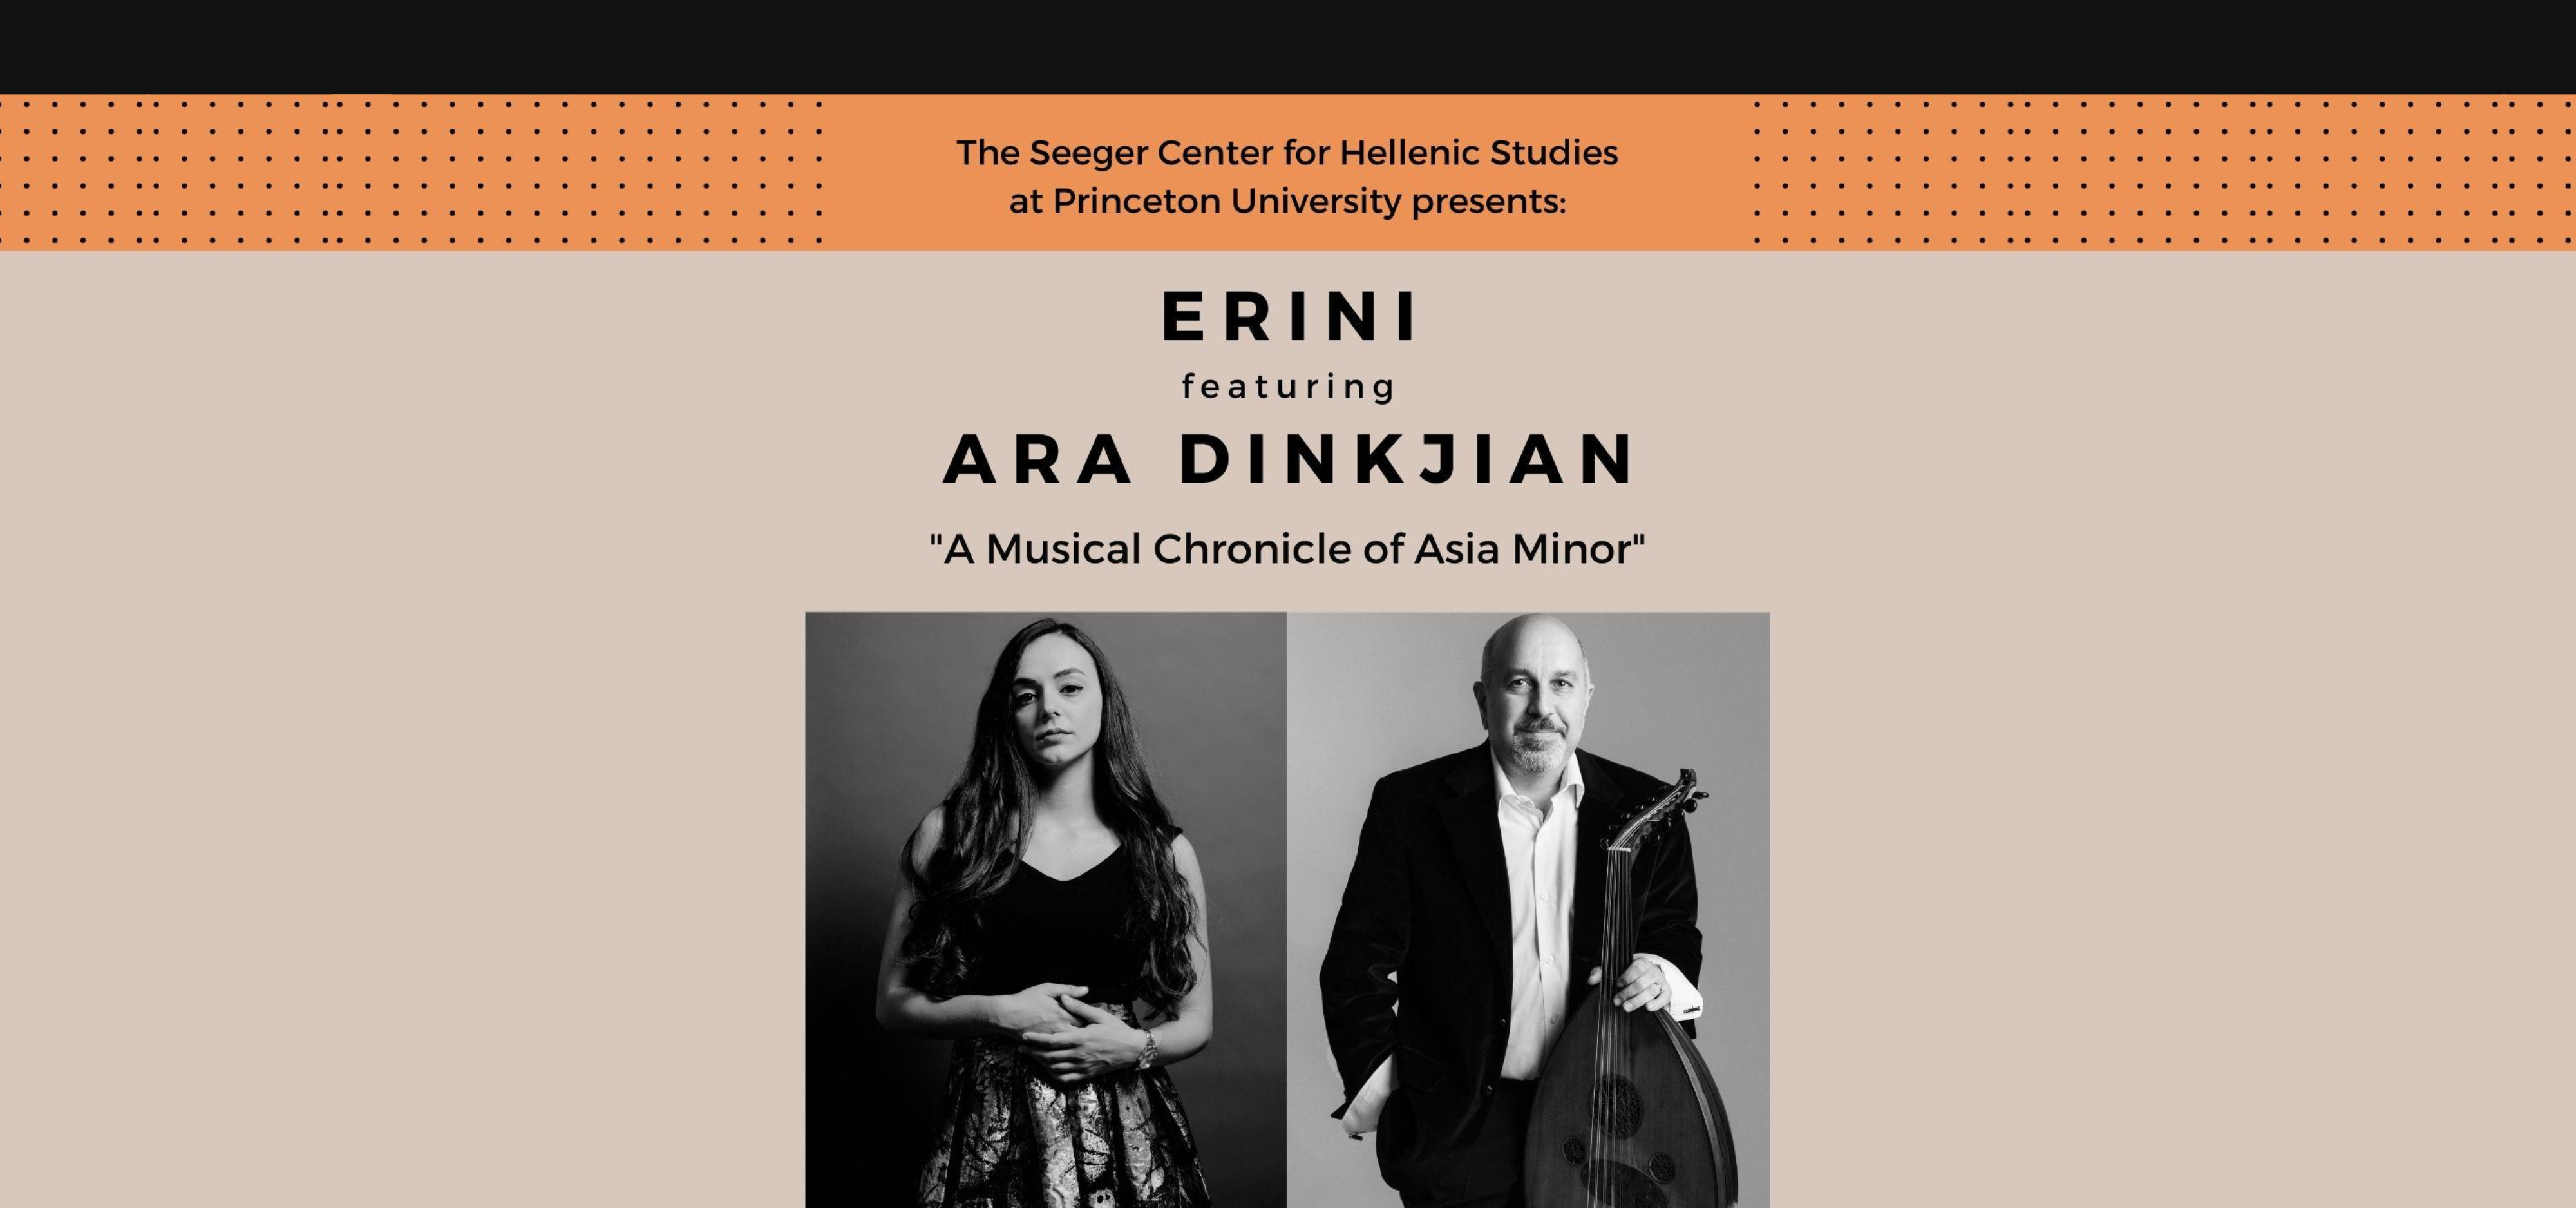 poster with beige background and headshot photos of two performers: Erini and Ara Dinkjian,